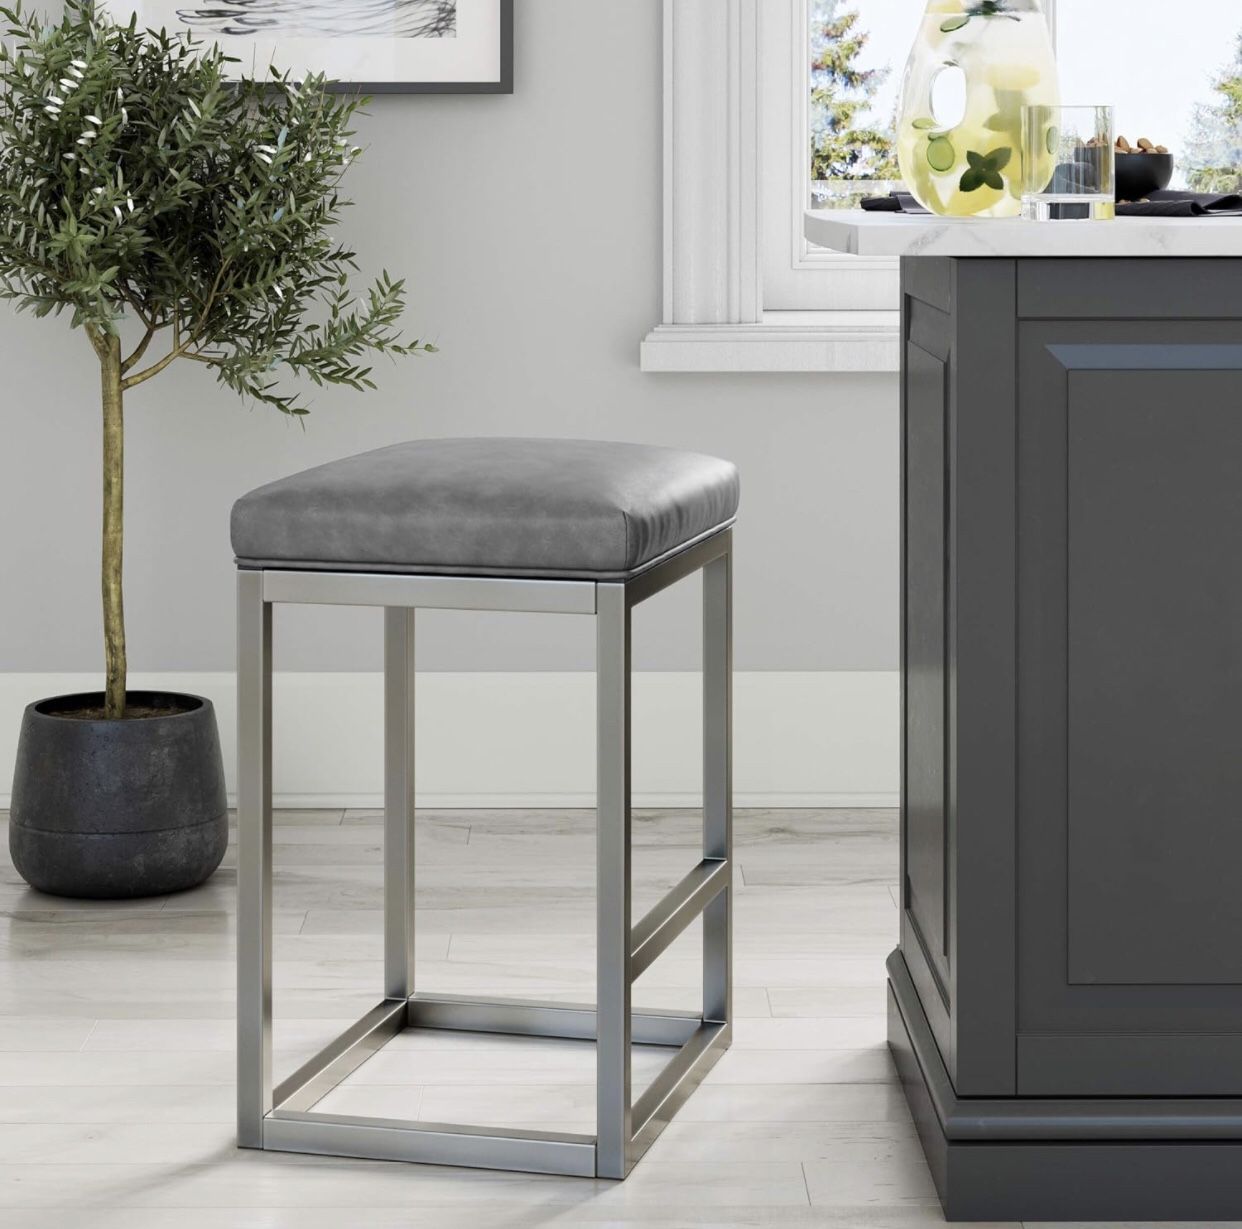 NEW! Nathan James Nelson Bar Stool with Leather Cushion and Metal Base, 24", Gray/Stainless Steel